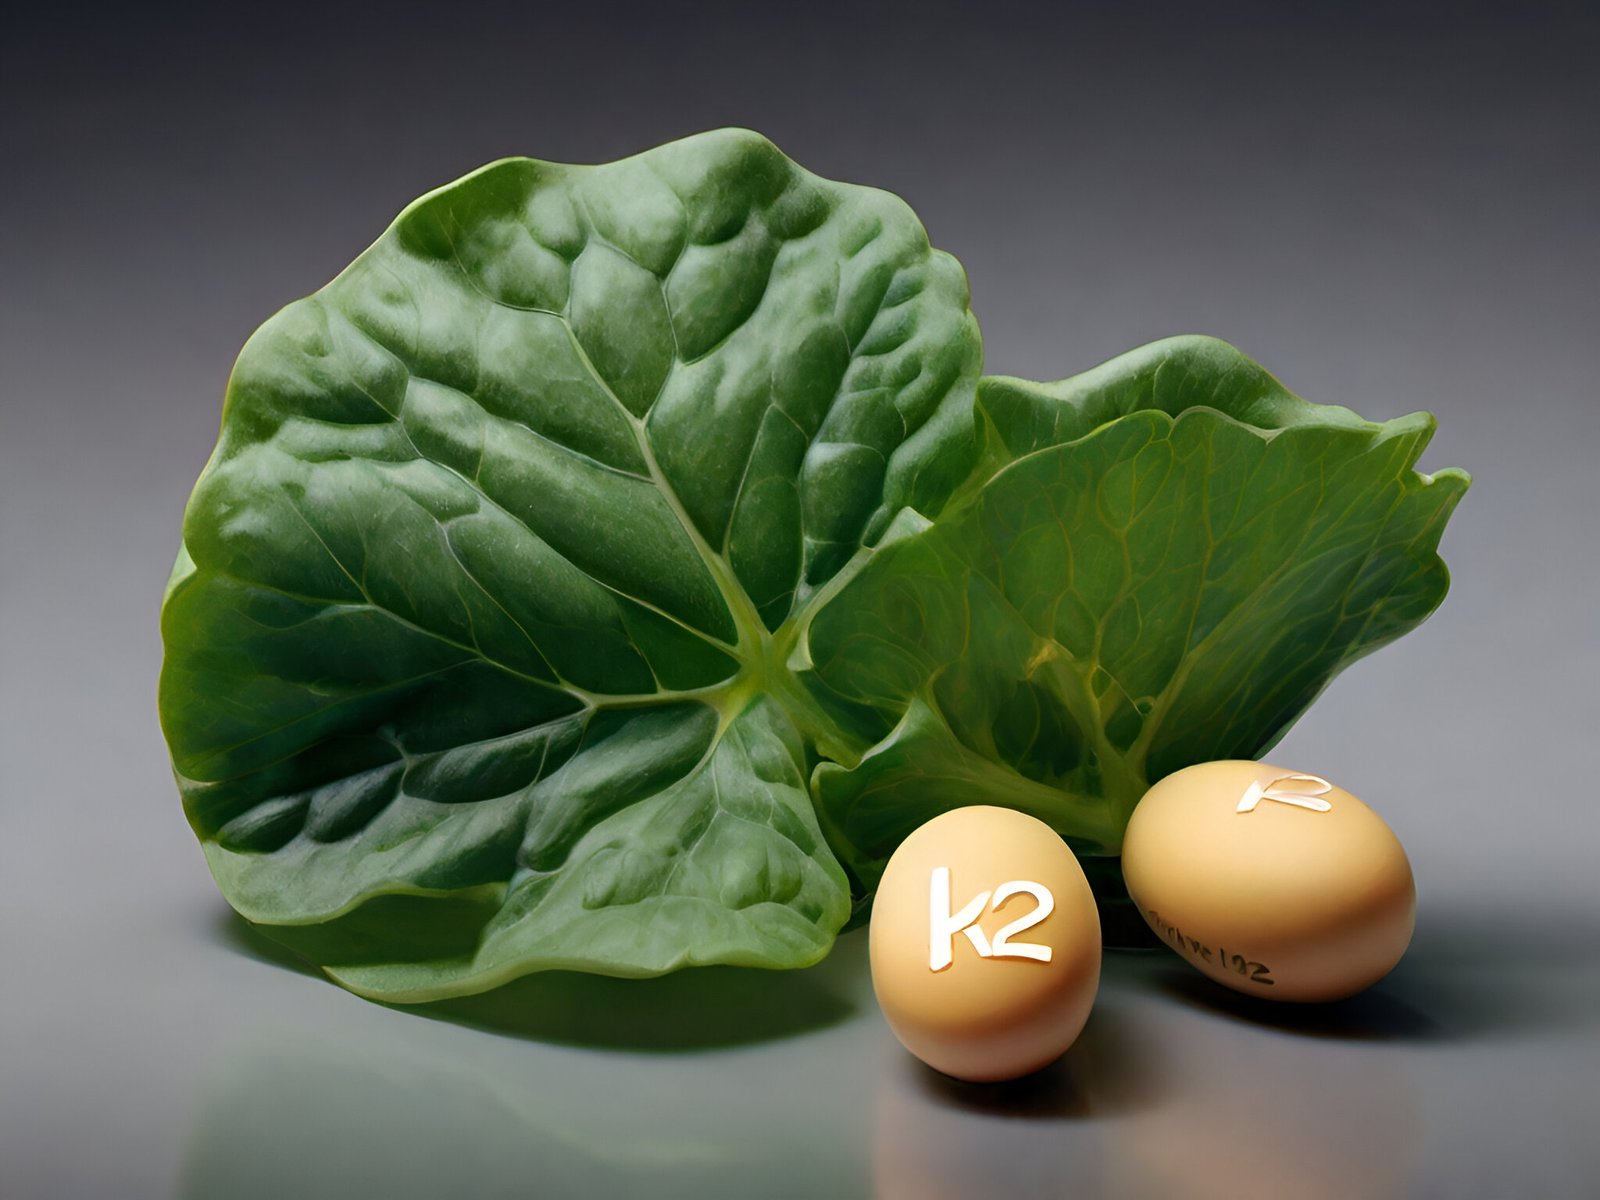 What Are The Best Vitamin K2 Foods?